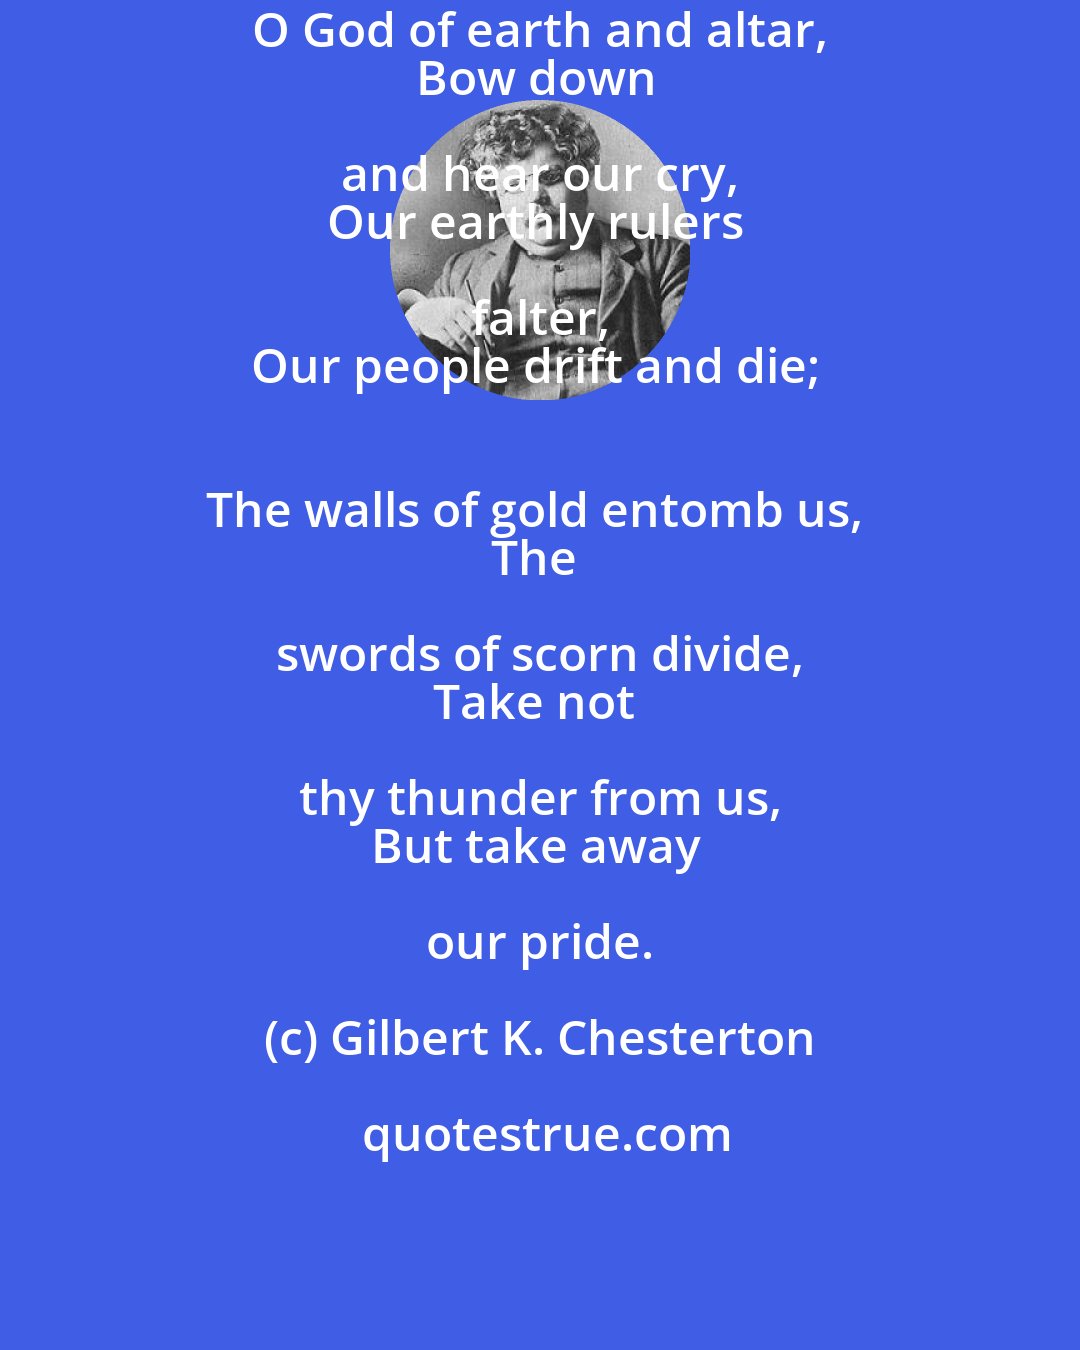 Gilbert K. Chesterton: O God of earth and altar, 
Bow down and hear our cry, 
Our earthly rulers falter, 
Our people drift and die; 
The walls of gold entomb us, 
The swords of scorn divide, 
Take not thy thunder from us, 
But take away our pride.